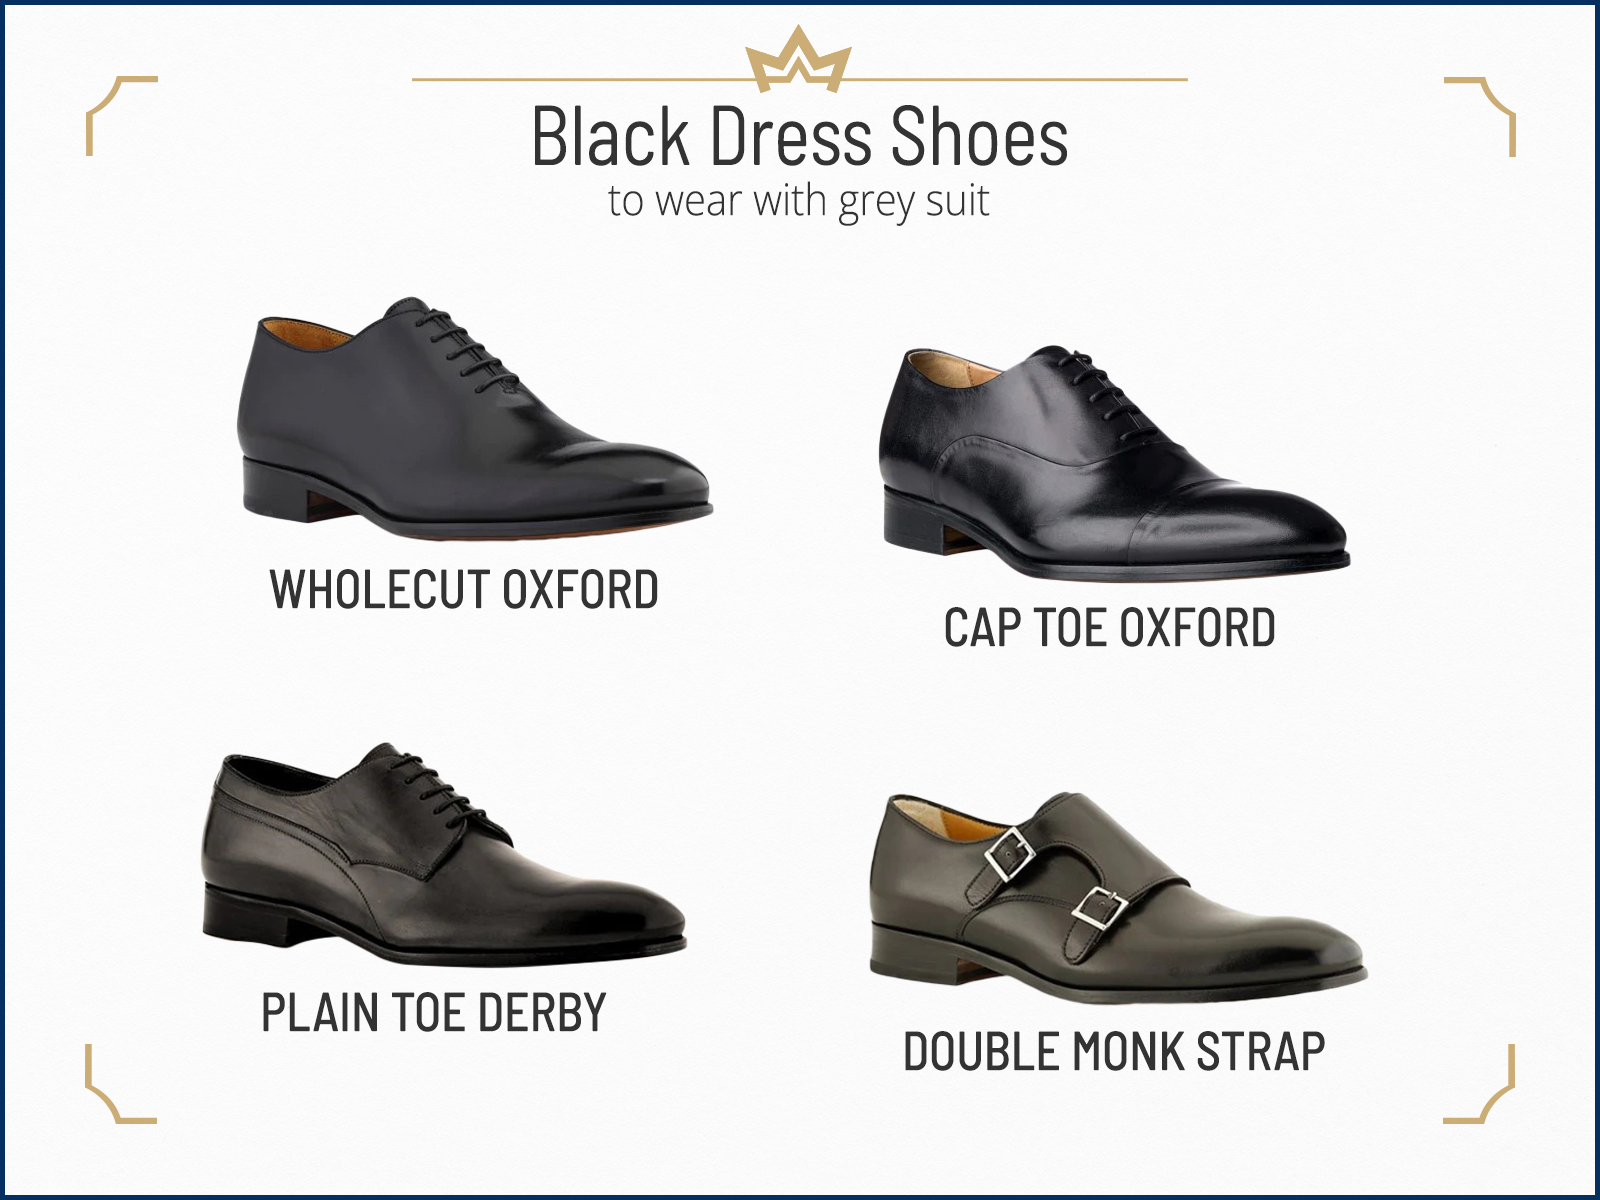 Recommended black dress shoe types for grey suits